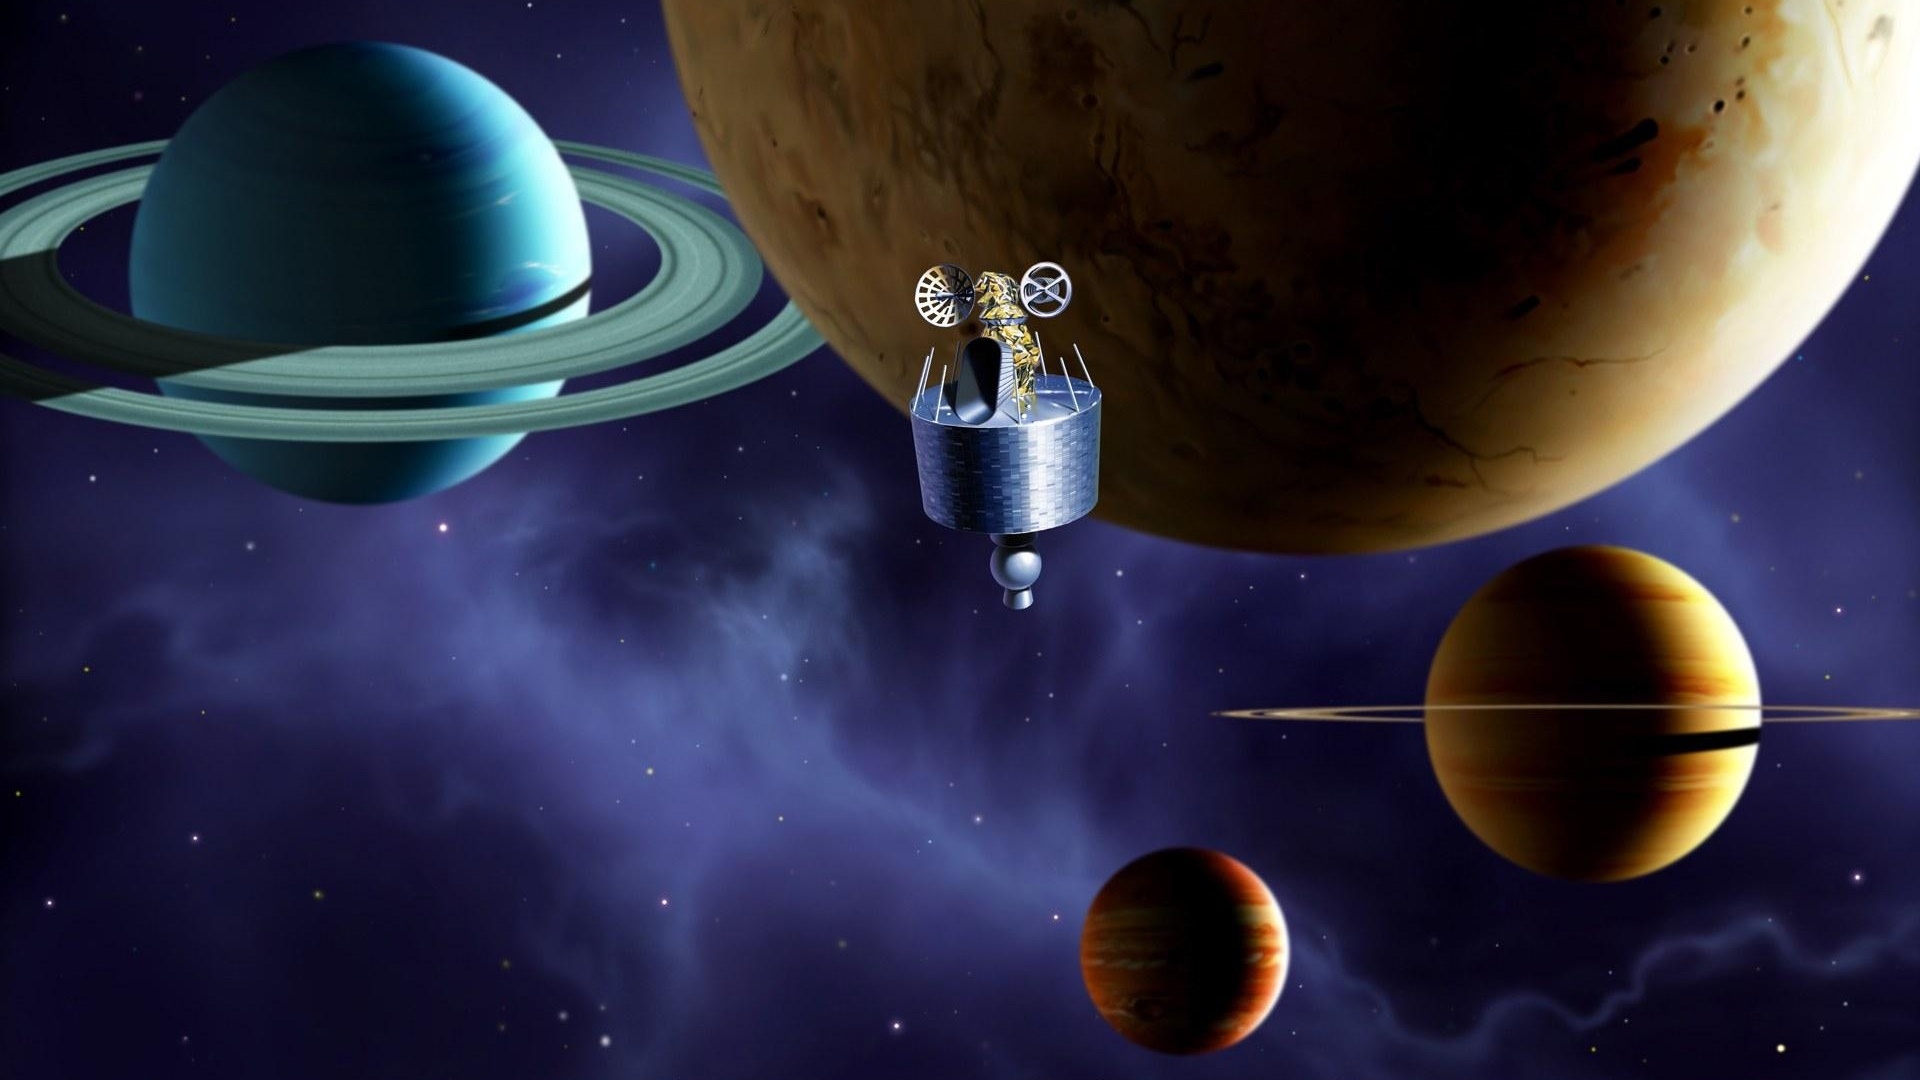 Planets and Earth for 1920 x 1080 HDTV 1080p resolution